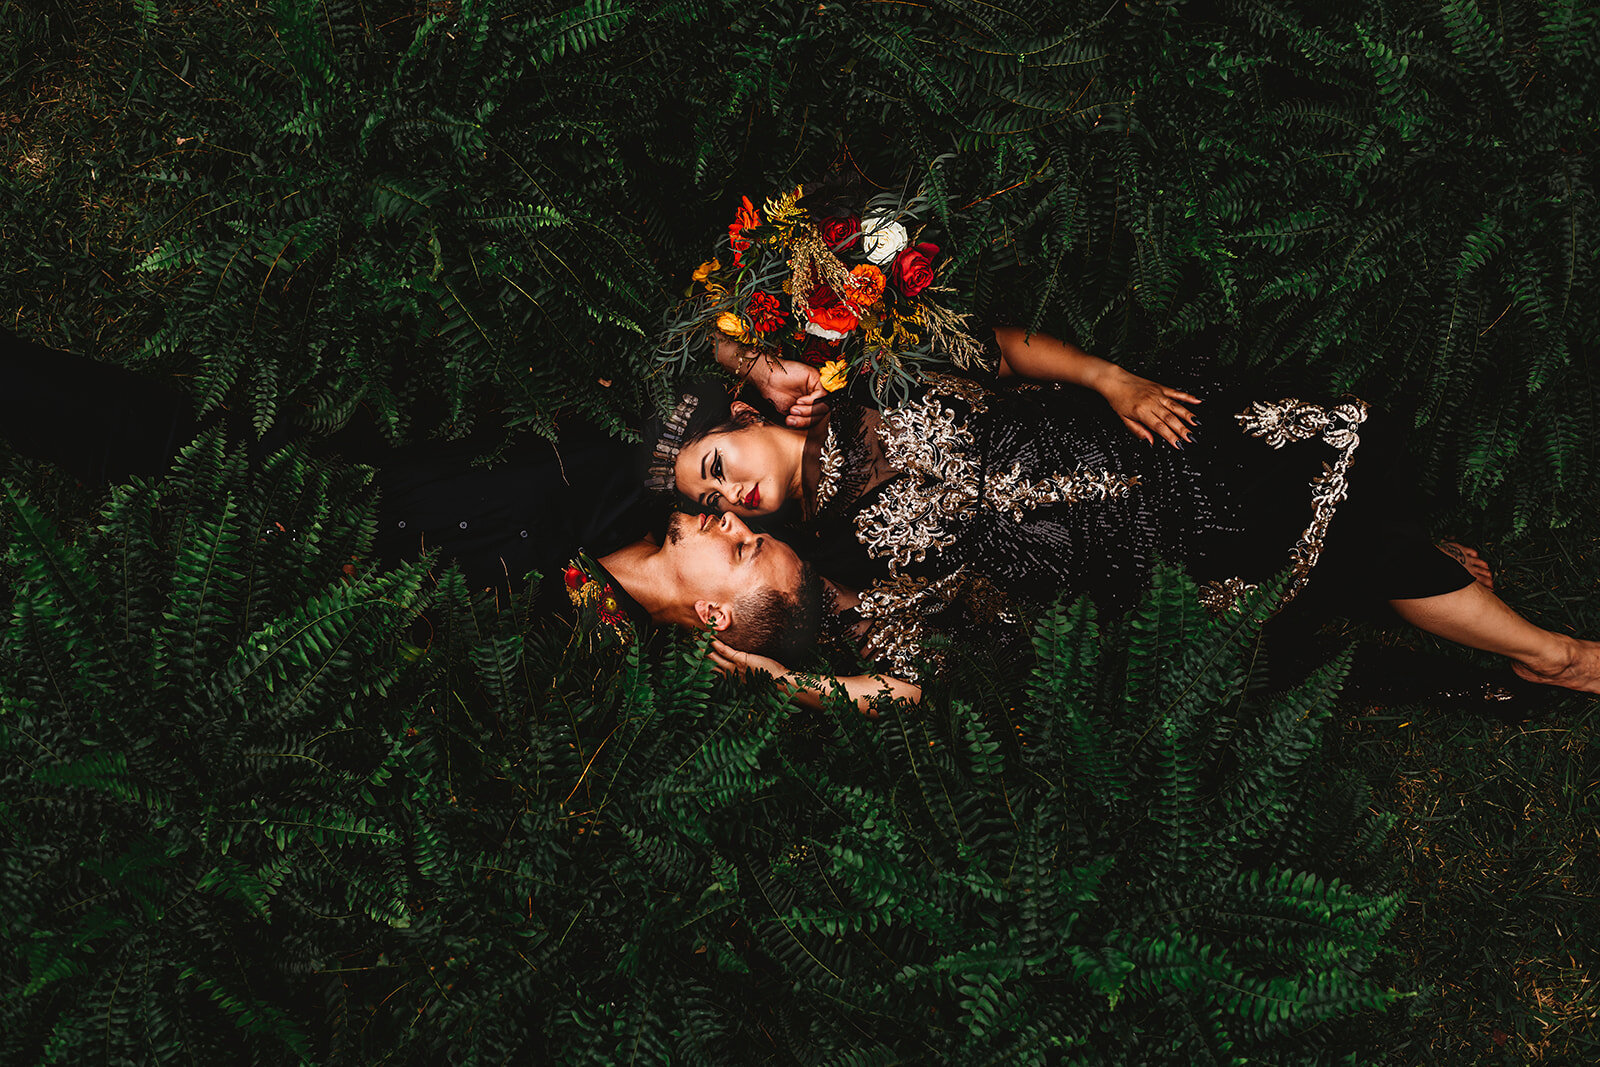 Baltimore photographers captures unique wedding photos with bride and groom laying together in a field of ferns while they embrace each other